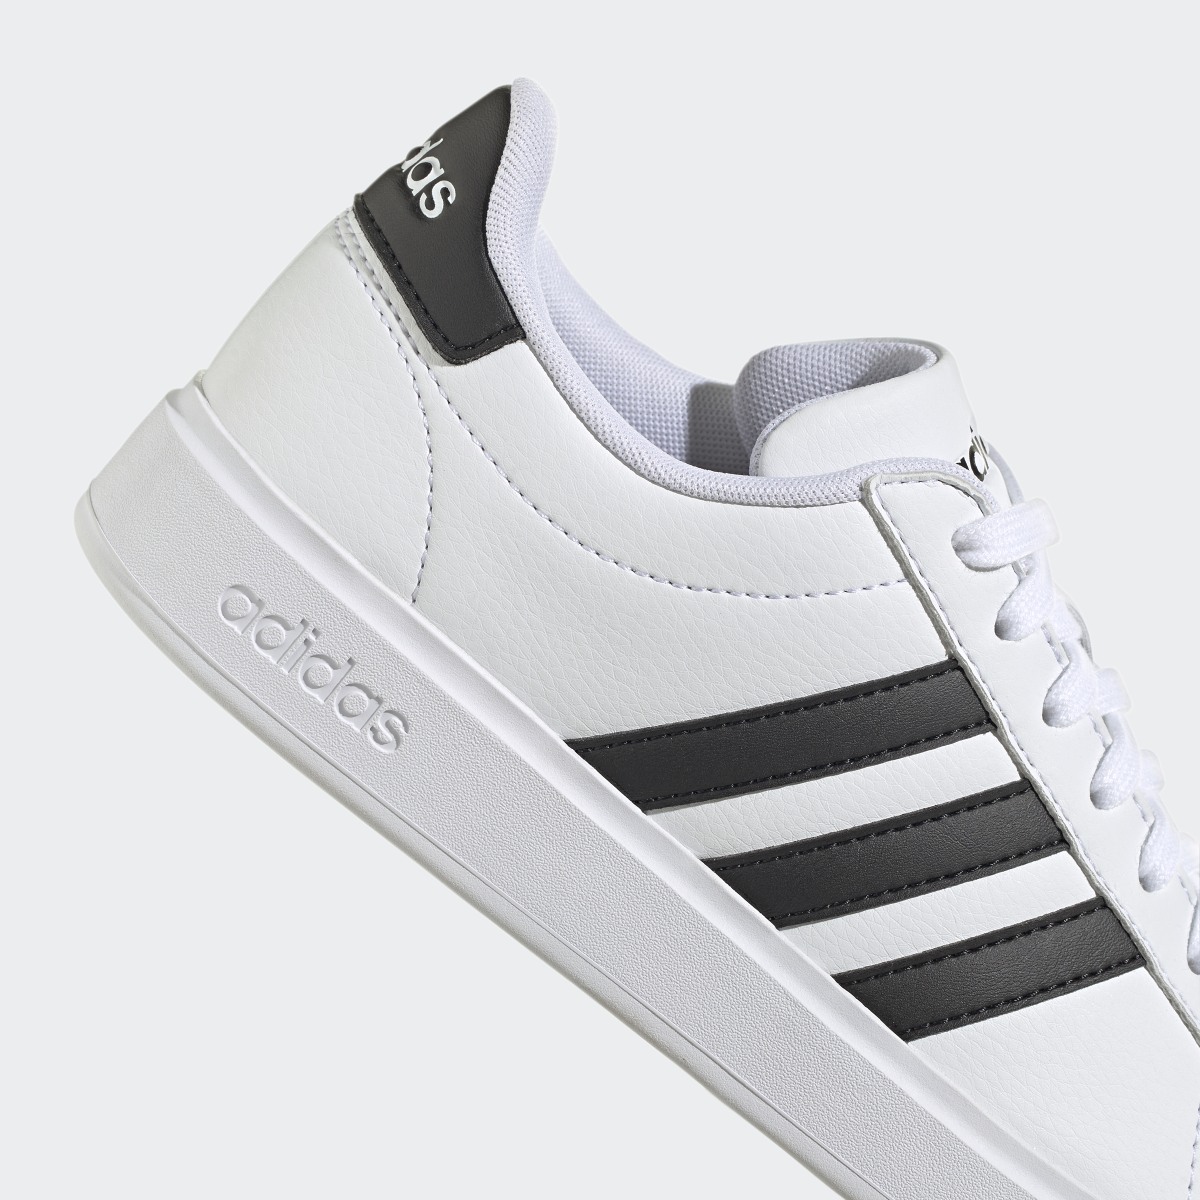 Adidas Grand Court Shoes. 10